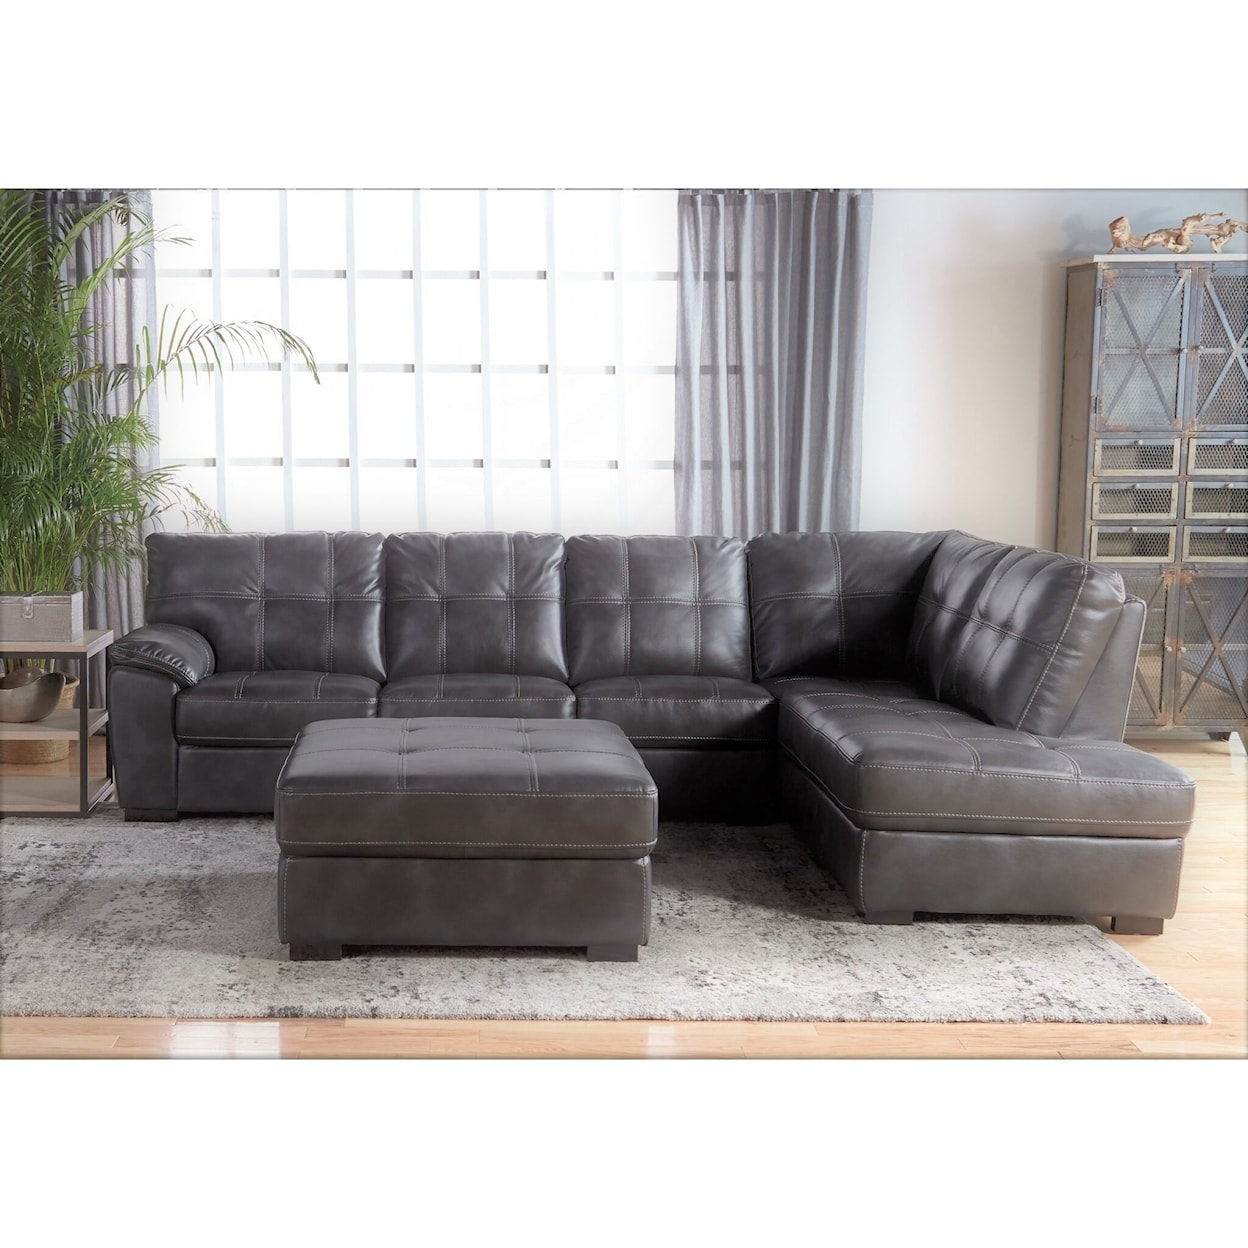 Cheers 5312 Tufted Square Ottoman